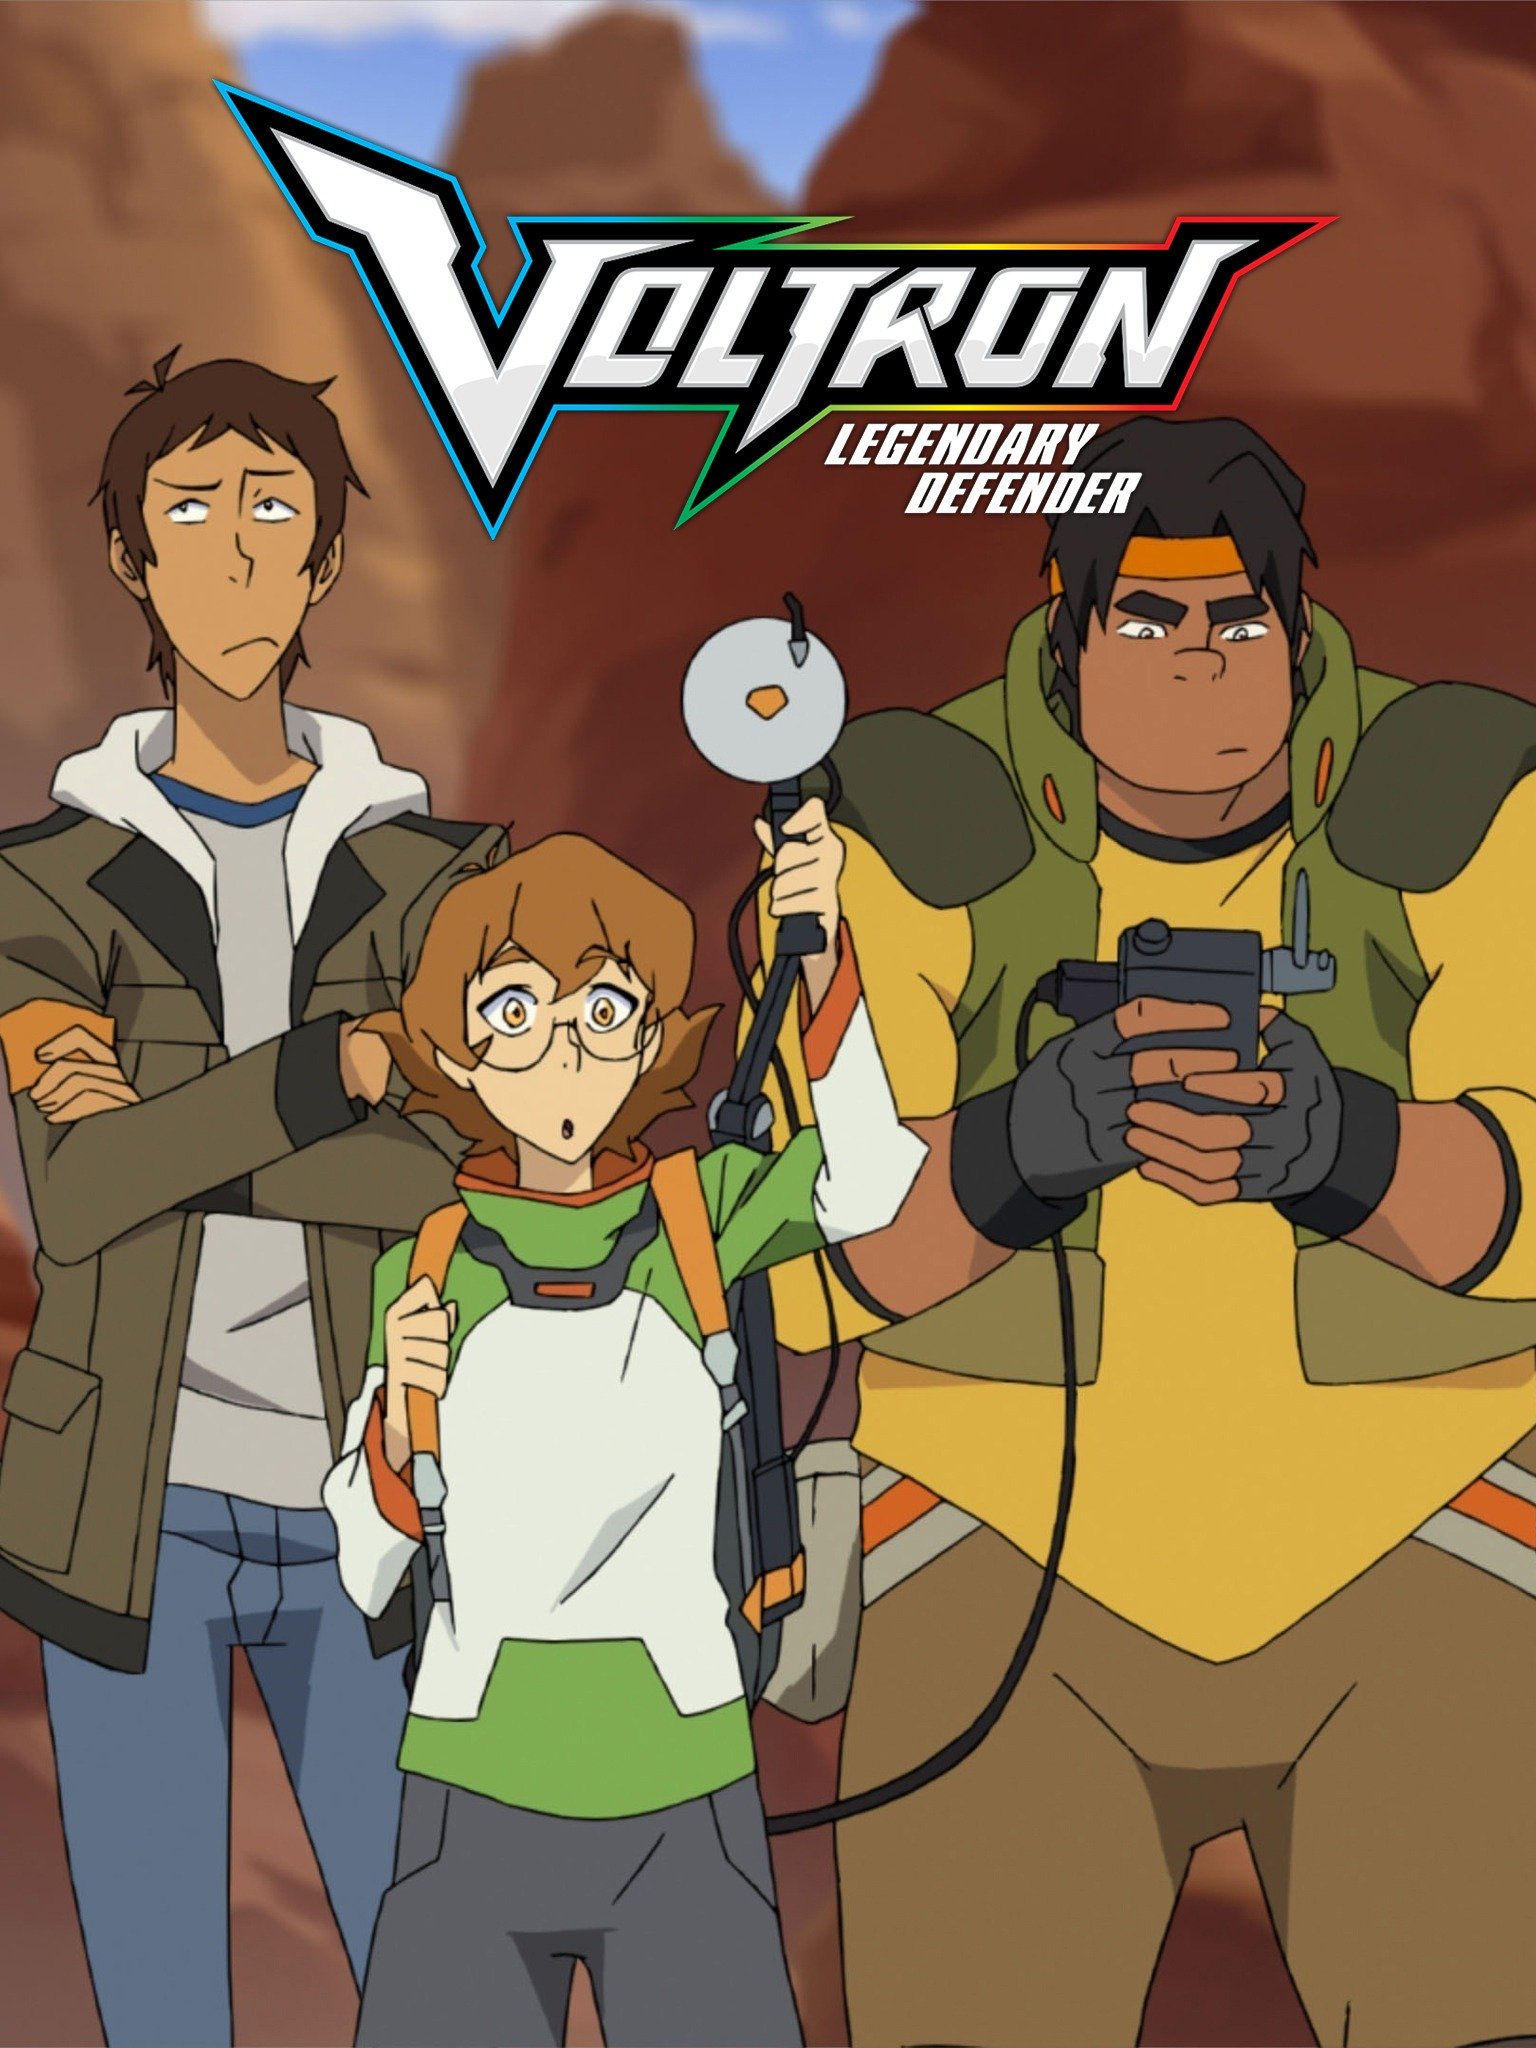 HD wallpaper Voltron Legendary Defender Anime sky mountain real people   Wallpaper Flare